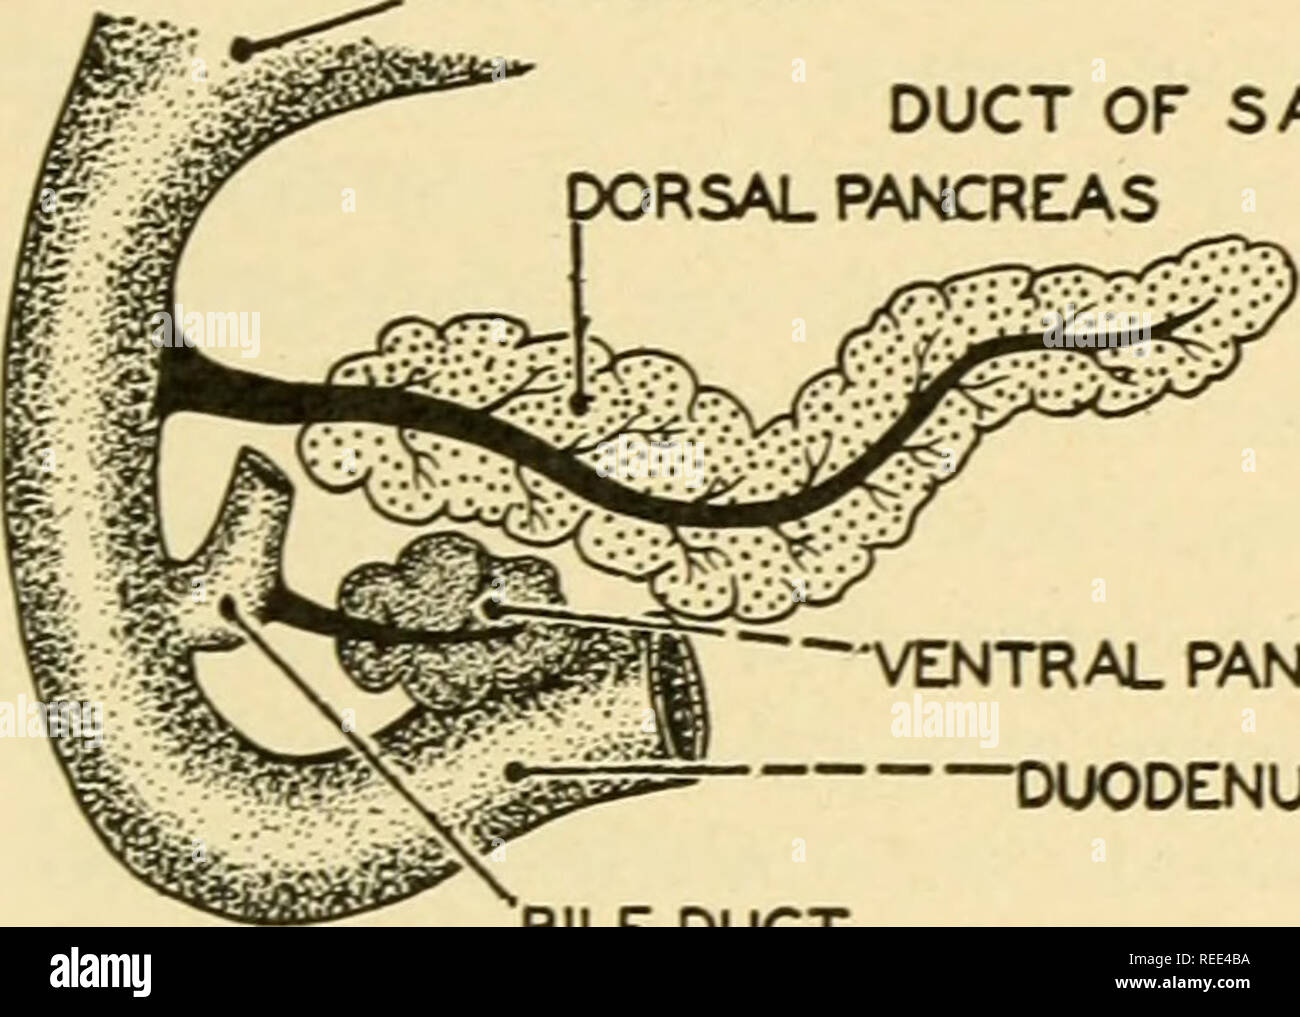 . Comparative anatomy. Anatomy, Comparative. THE DIGESTIVE SYSTEM 327 centrated near the lumen of the acinus. Secretions pass from the lumina of the glands into fine intercalated ducts, and from these into secretory ducts like those of the parotid. Scattered irregularly among the acini of the pancreas are clusters of lightly-staining cells. The area of these clusters in section is considerably greater than that of a single acinus. These are the islands of Langerhans, endocrinal organs which secrete insulin. Development of the Pancreas. Like the Hver, the pancreas develops from the endoderm. It Stock Photo